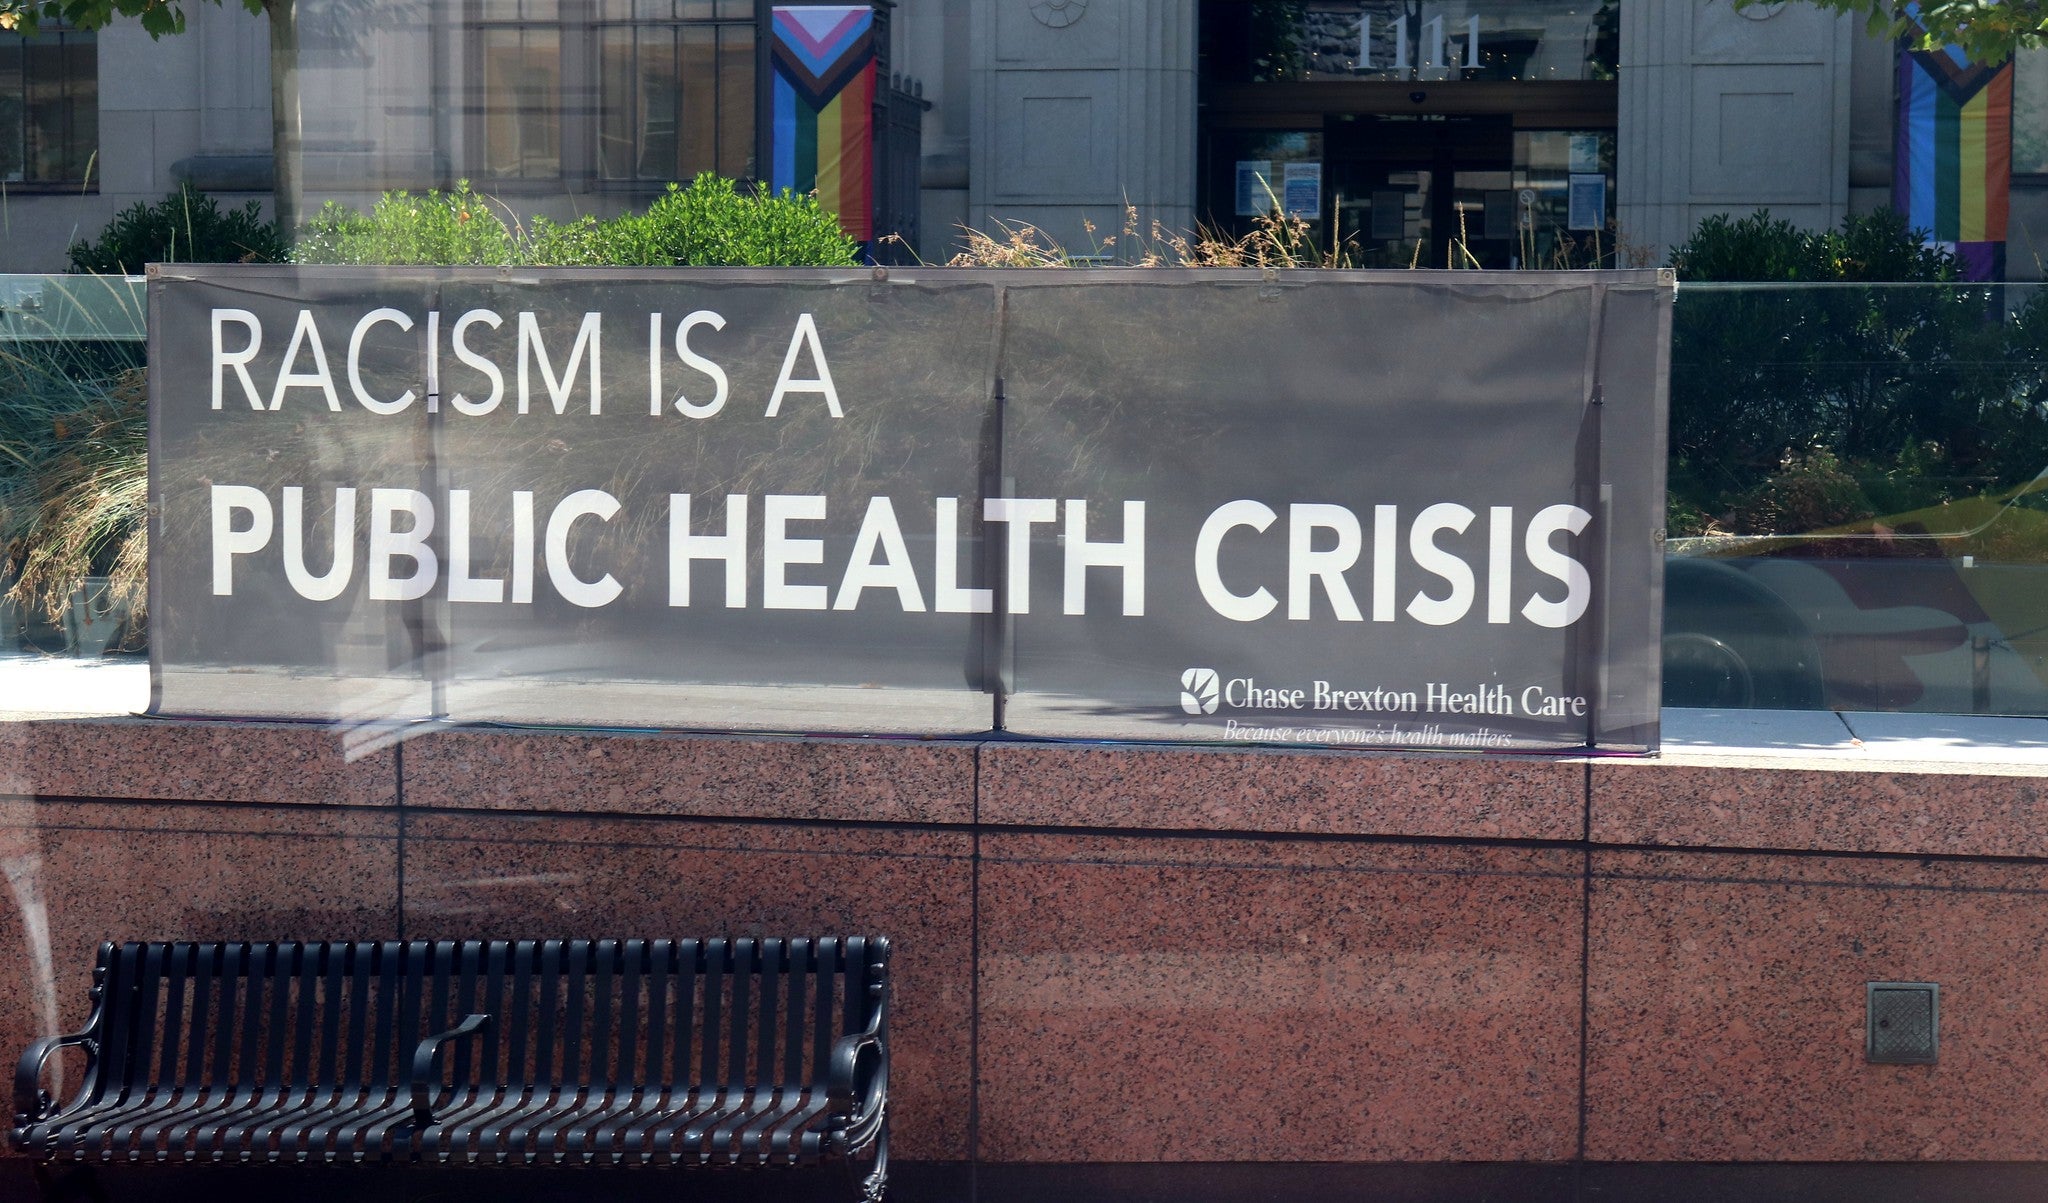 Sign stating "Racism is a public health crisis"